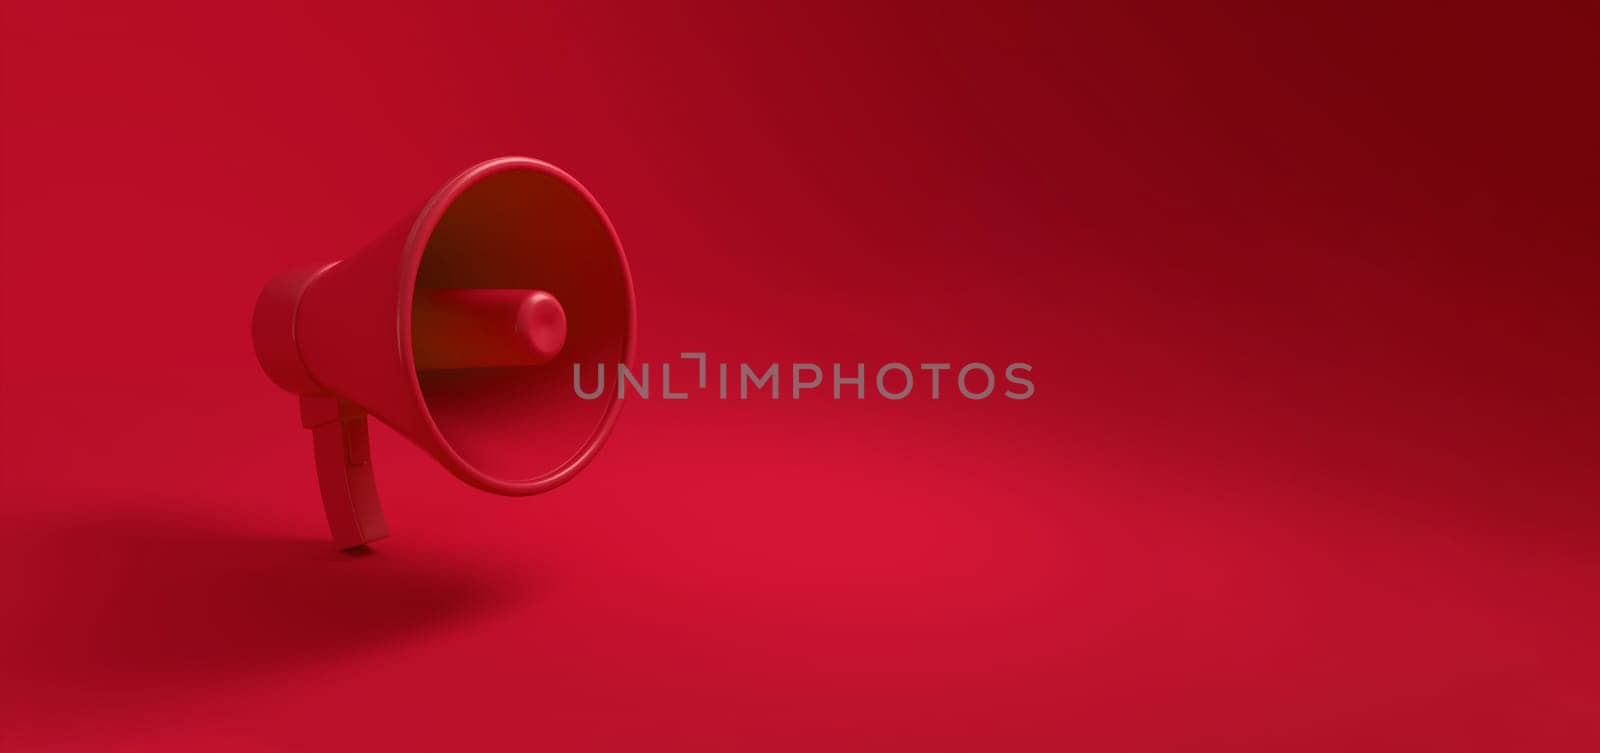 Megaphone on red background, Love and passion concept. by ImagesRouges